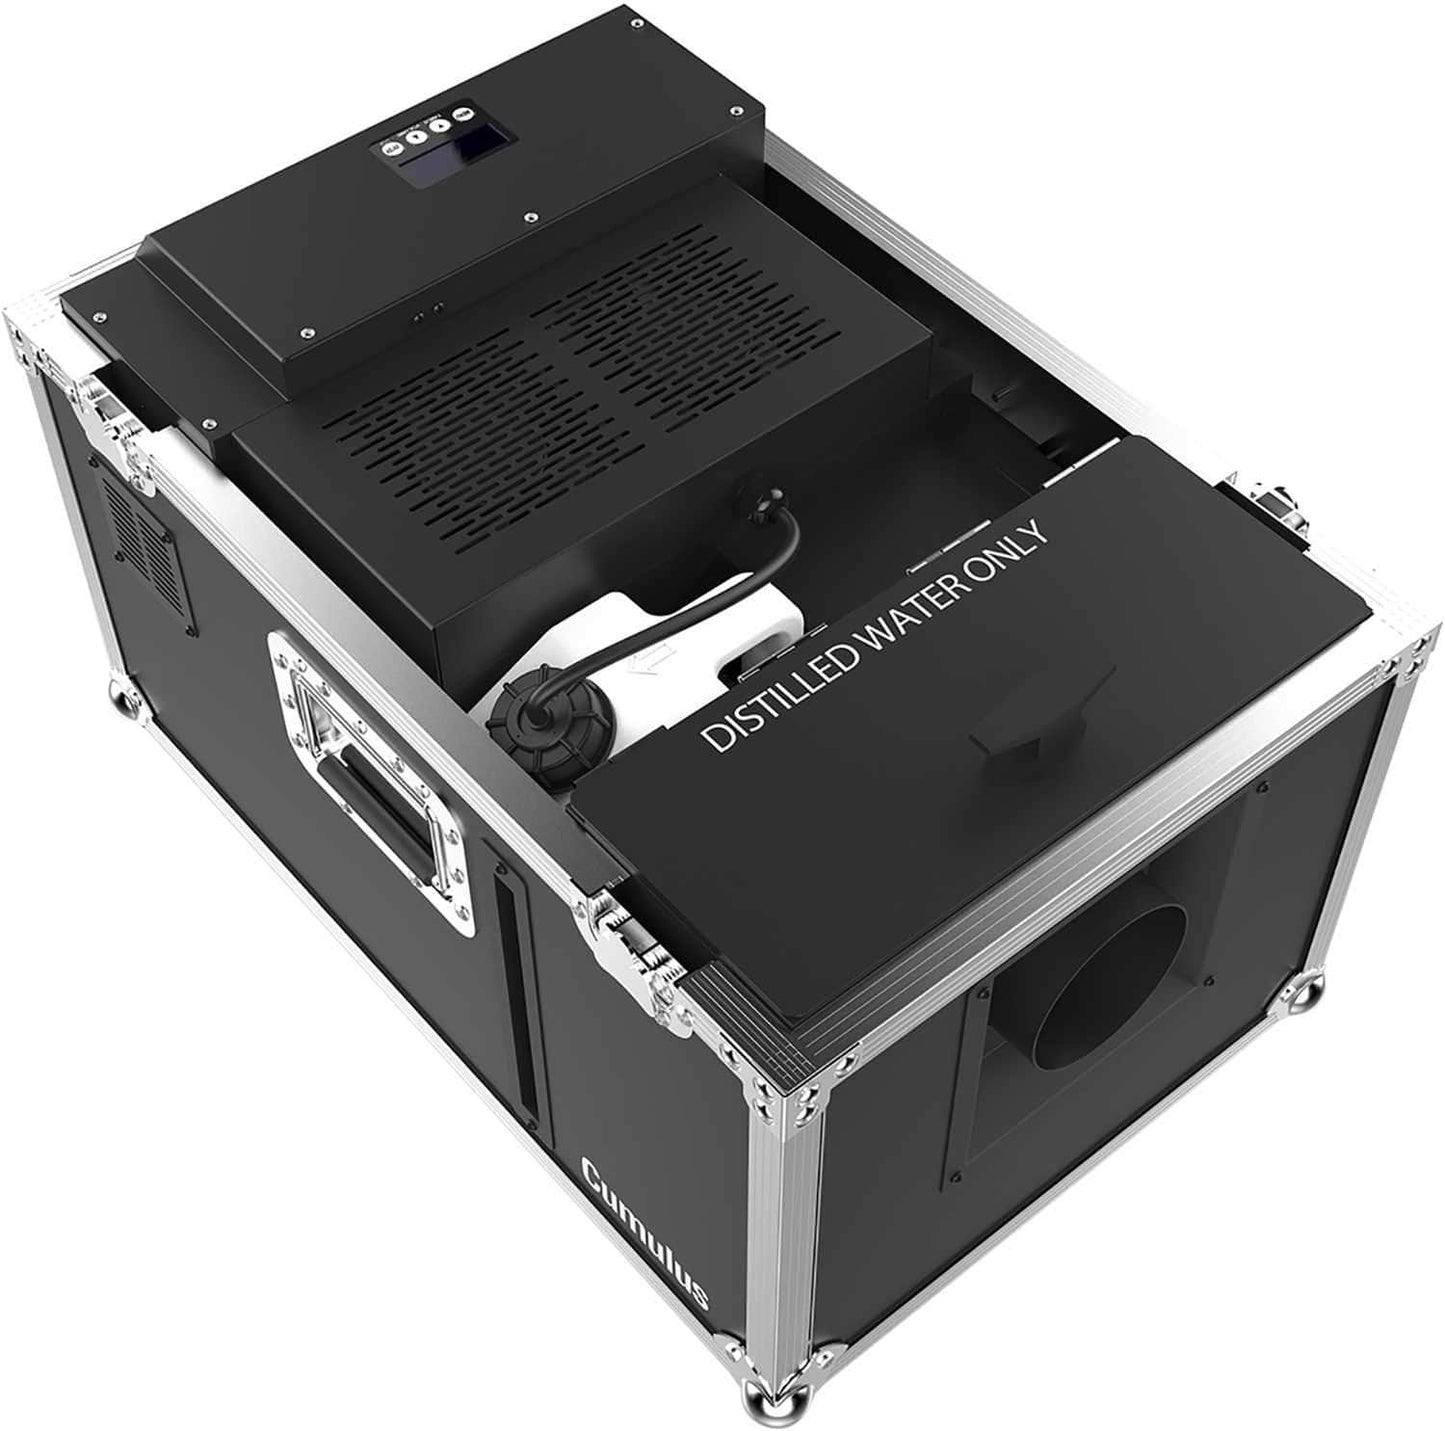 Chauvet Cumulus Low-Lying Fog Machine with QDF Fluid - PSSL ProSound and Stage Lighting